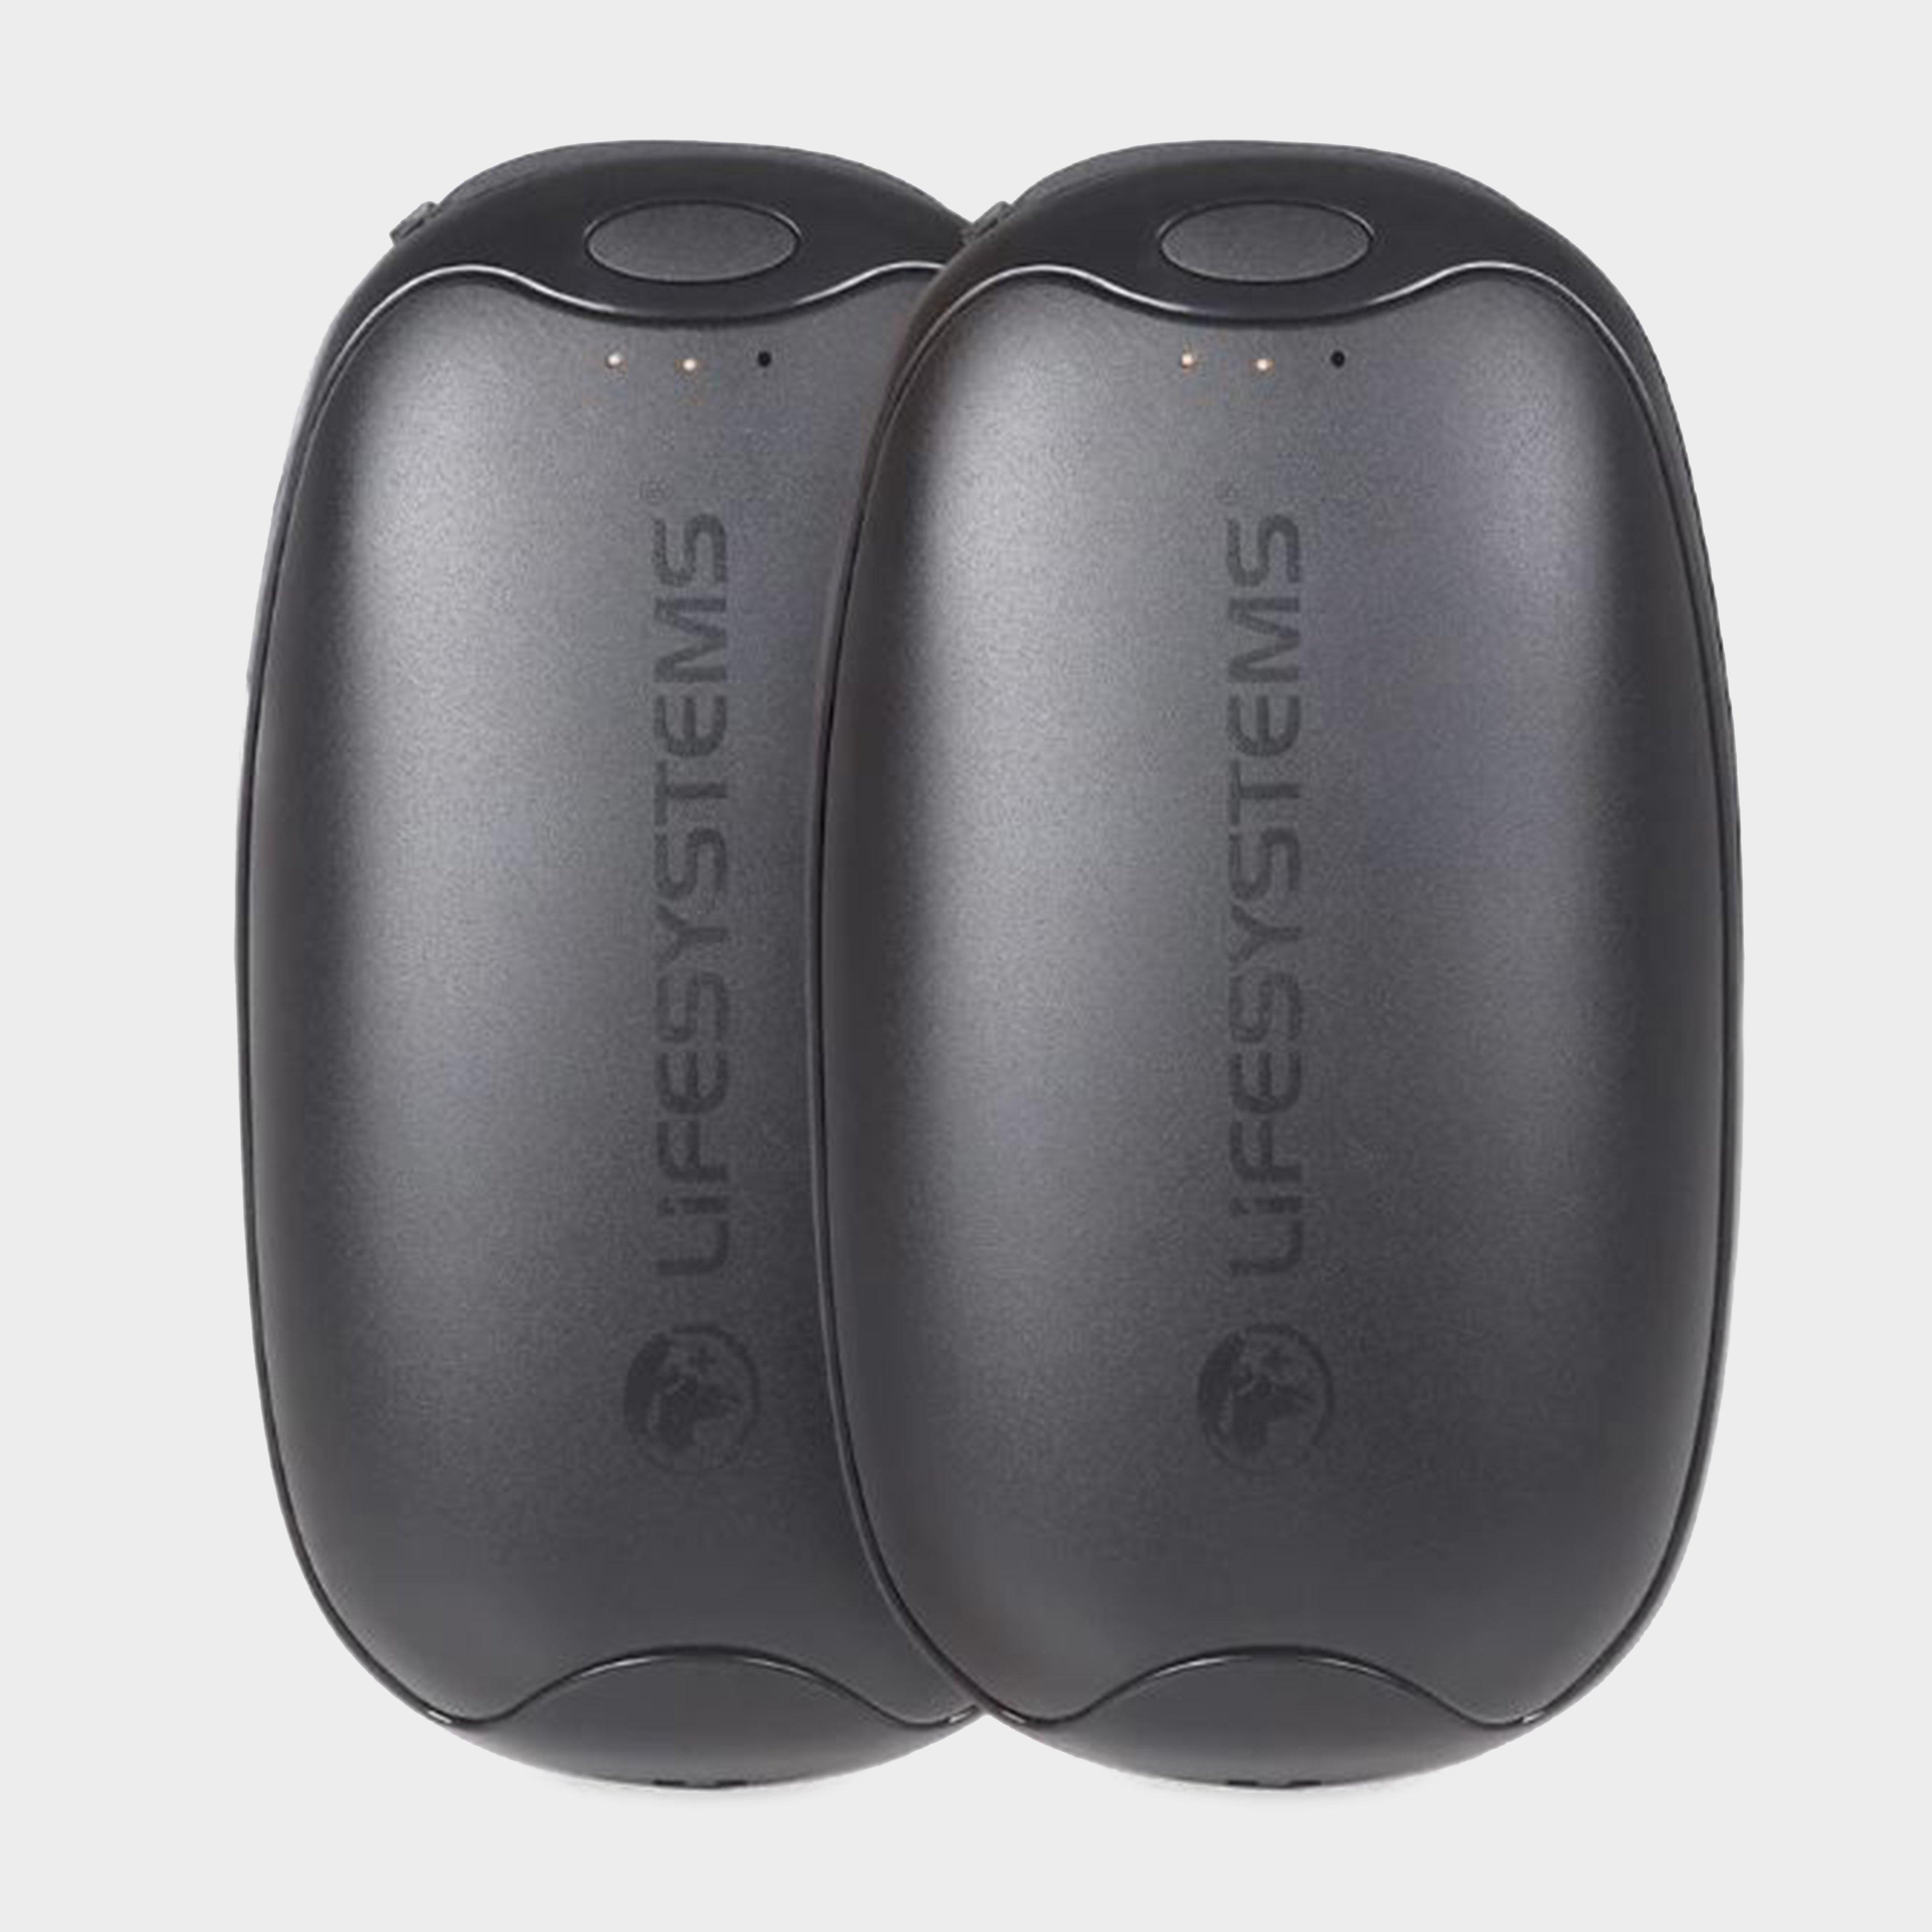  Lifesystems Dual-Palm Rechargeable Hand Warmers